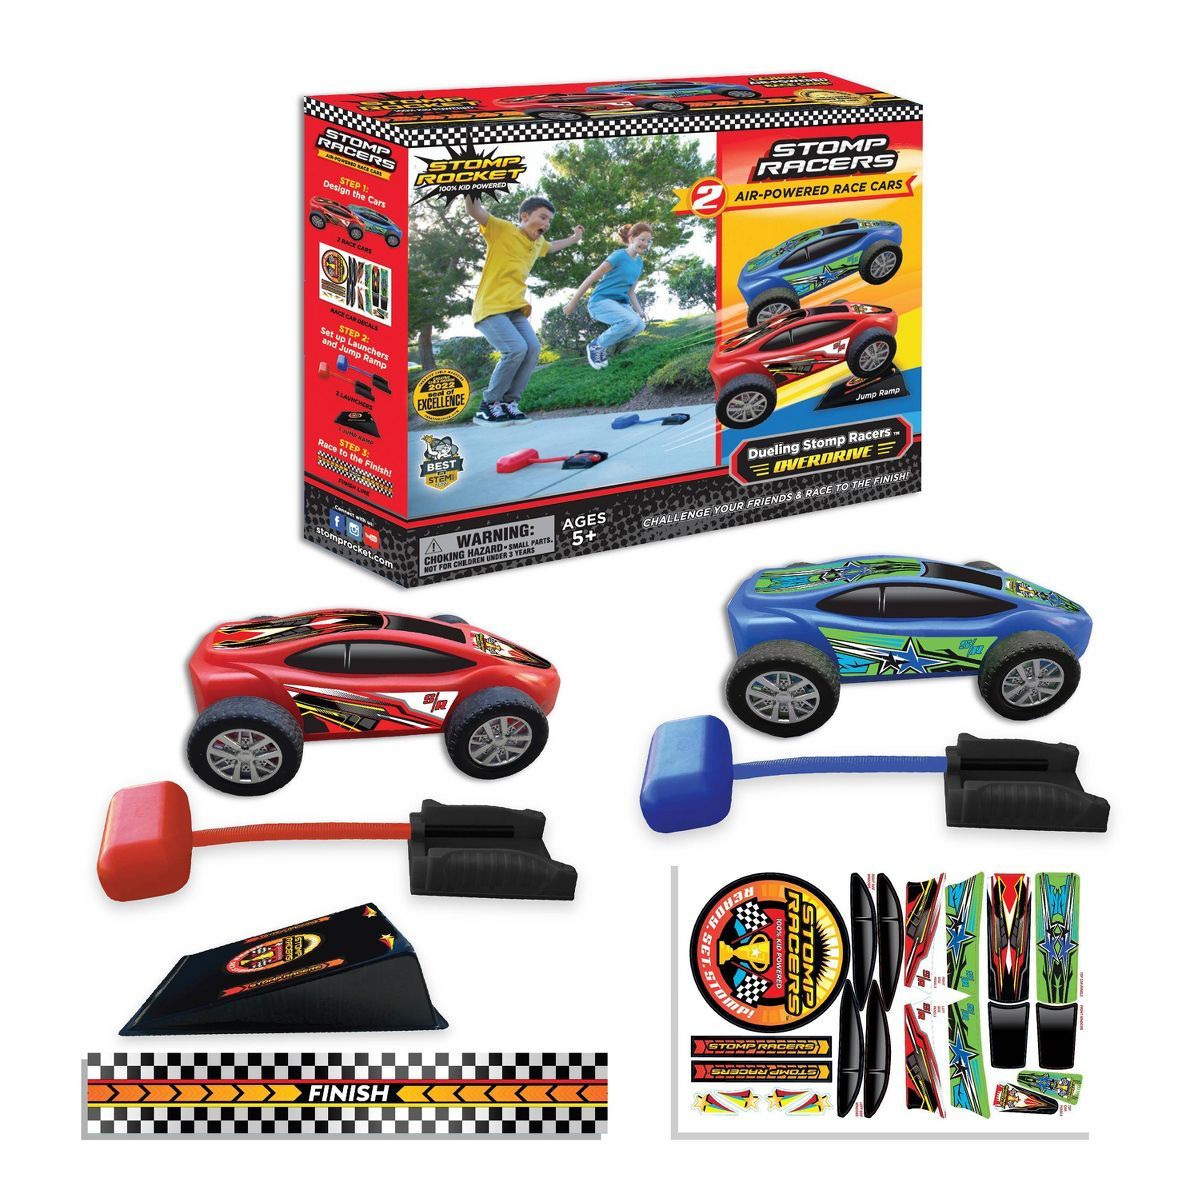 Stomp Rocket Dueling Stomp Racers Overdrive with 2 Race Cars & 2 Launchers | Target